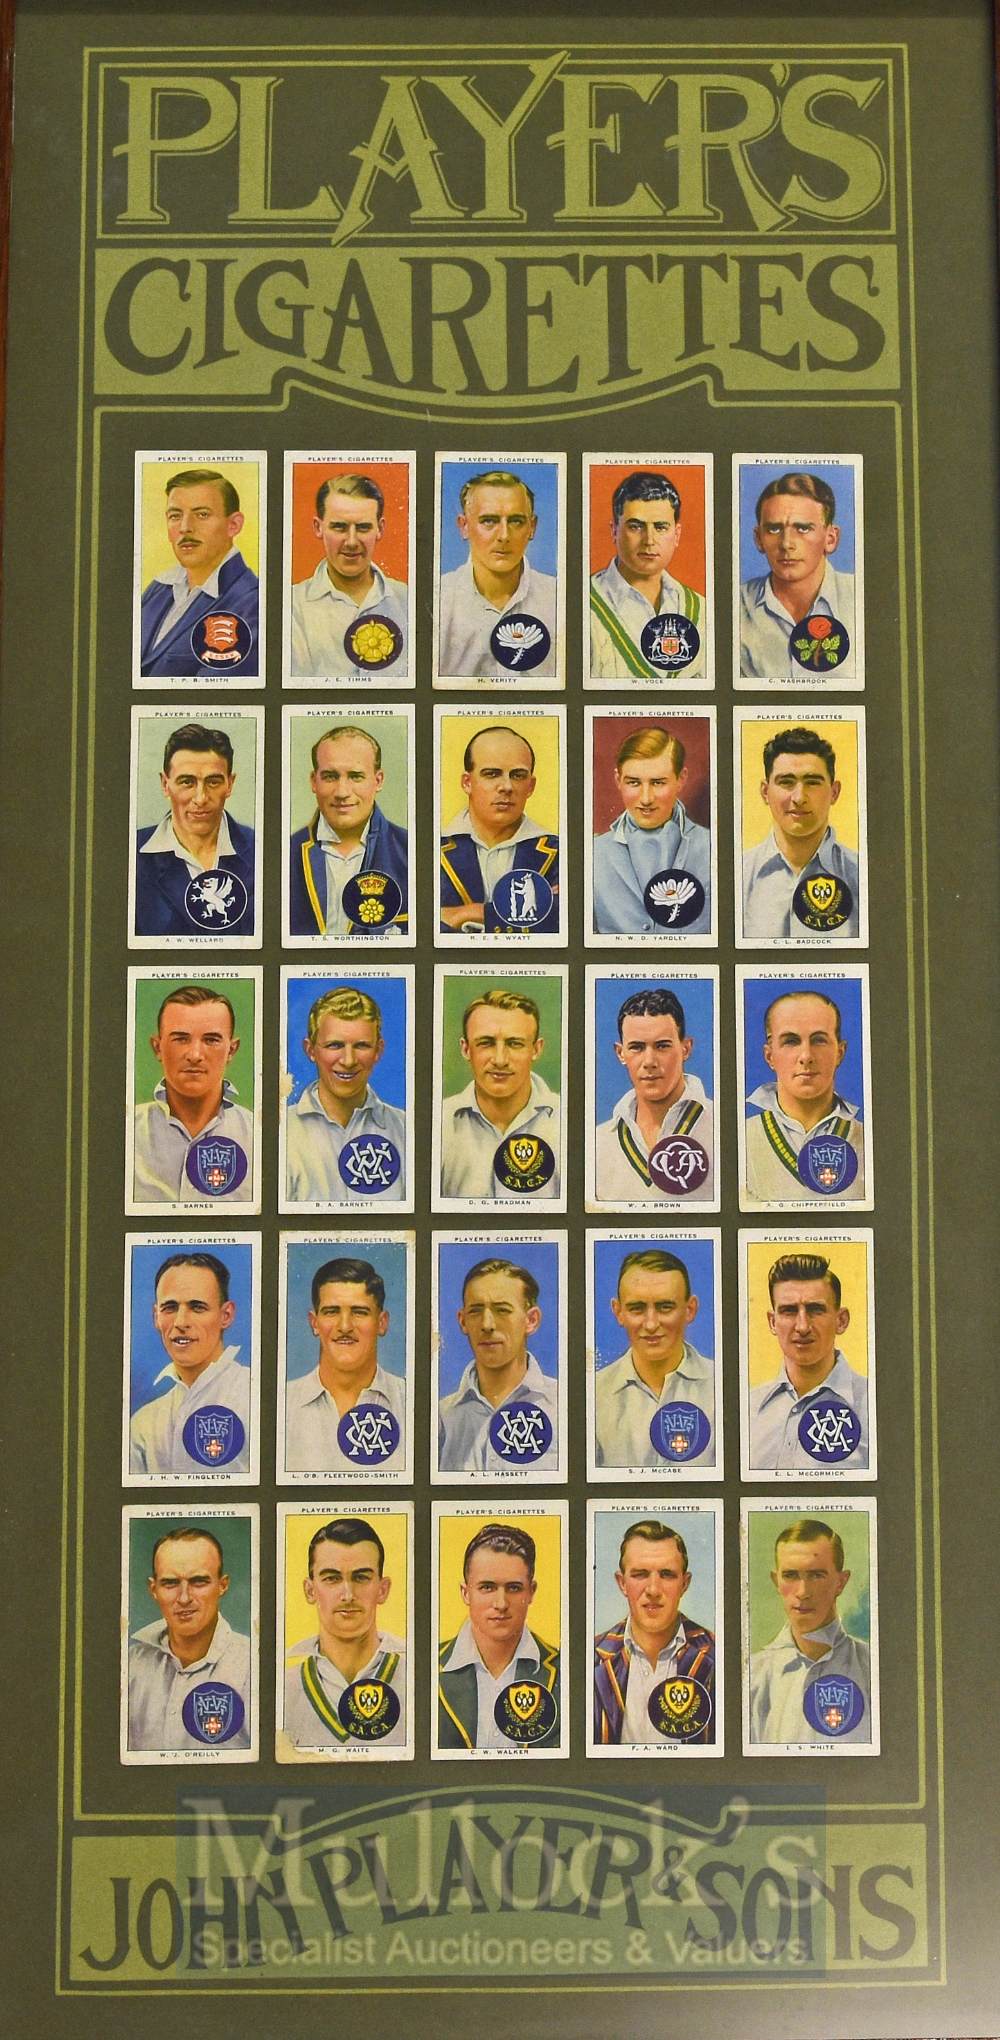 1938 John Player & Sons Cricket Cigarette Cards a half set, framed measures 31x60cm approx. with